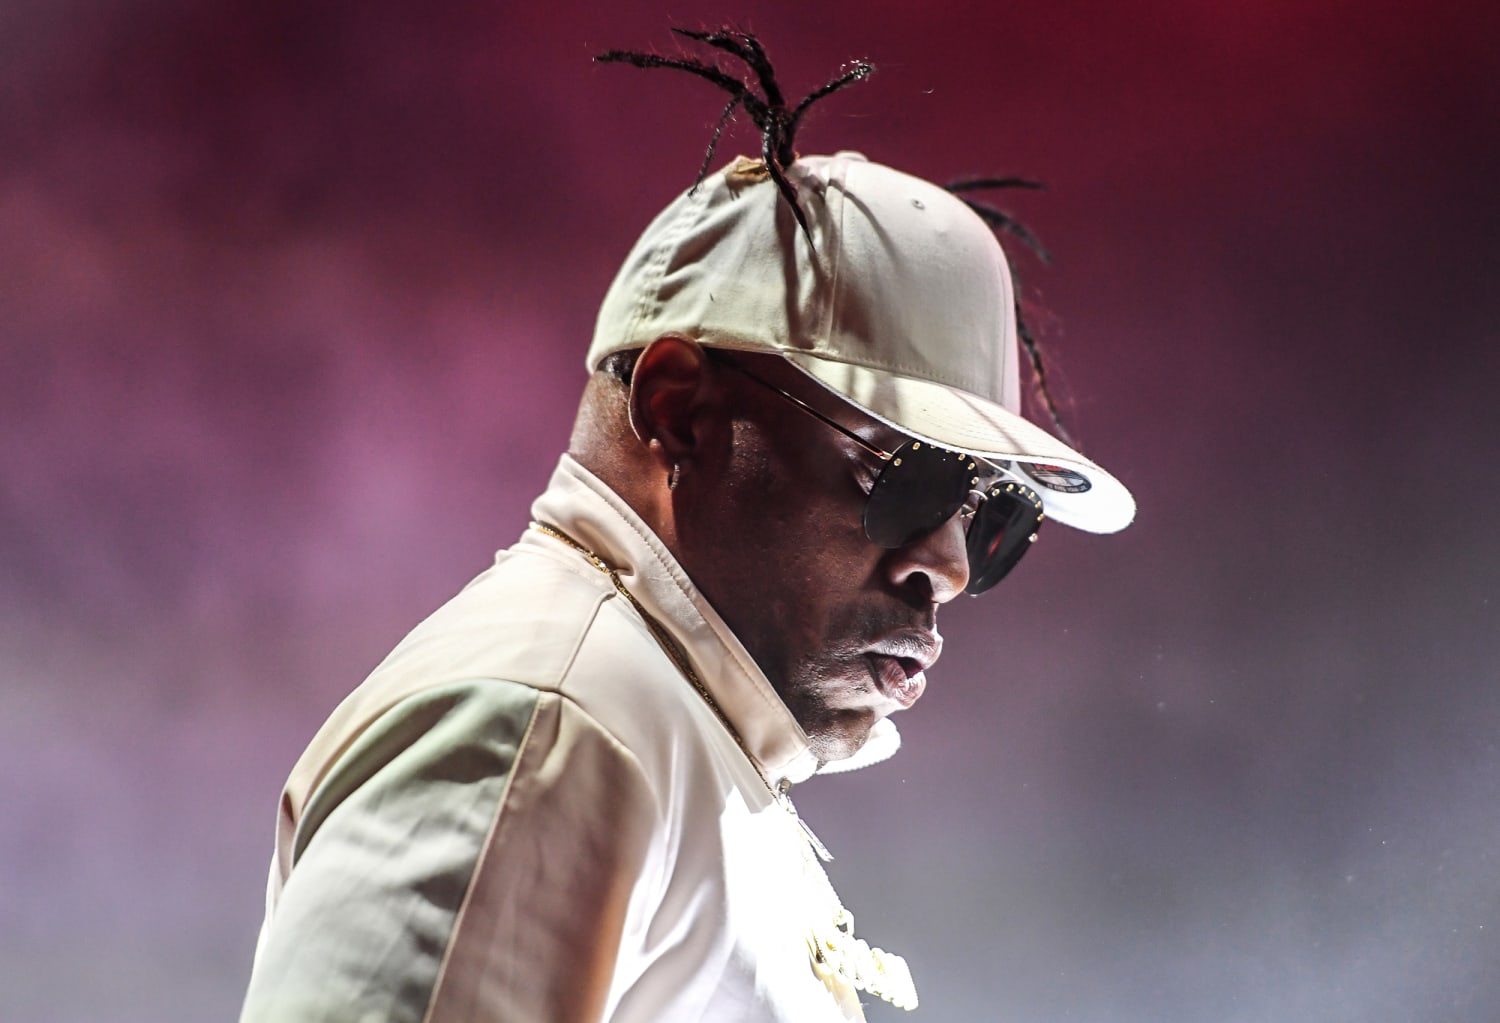 Coolio died of fentanyl and other drugs, medical examiner rules